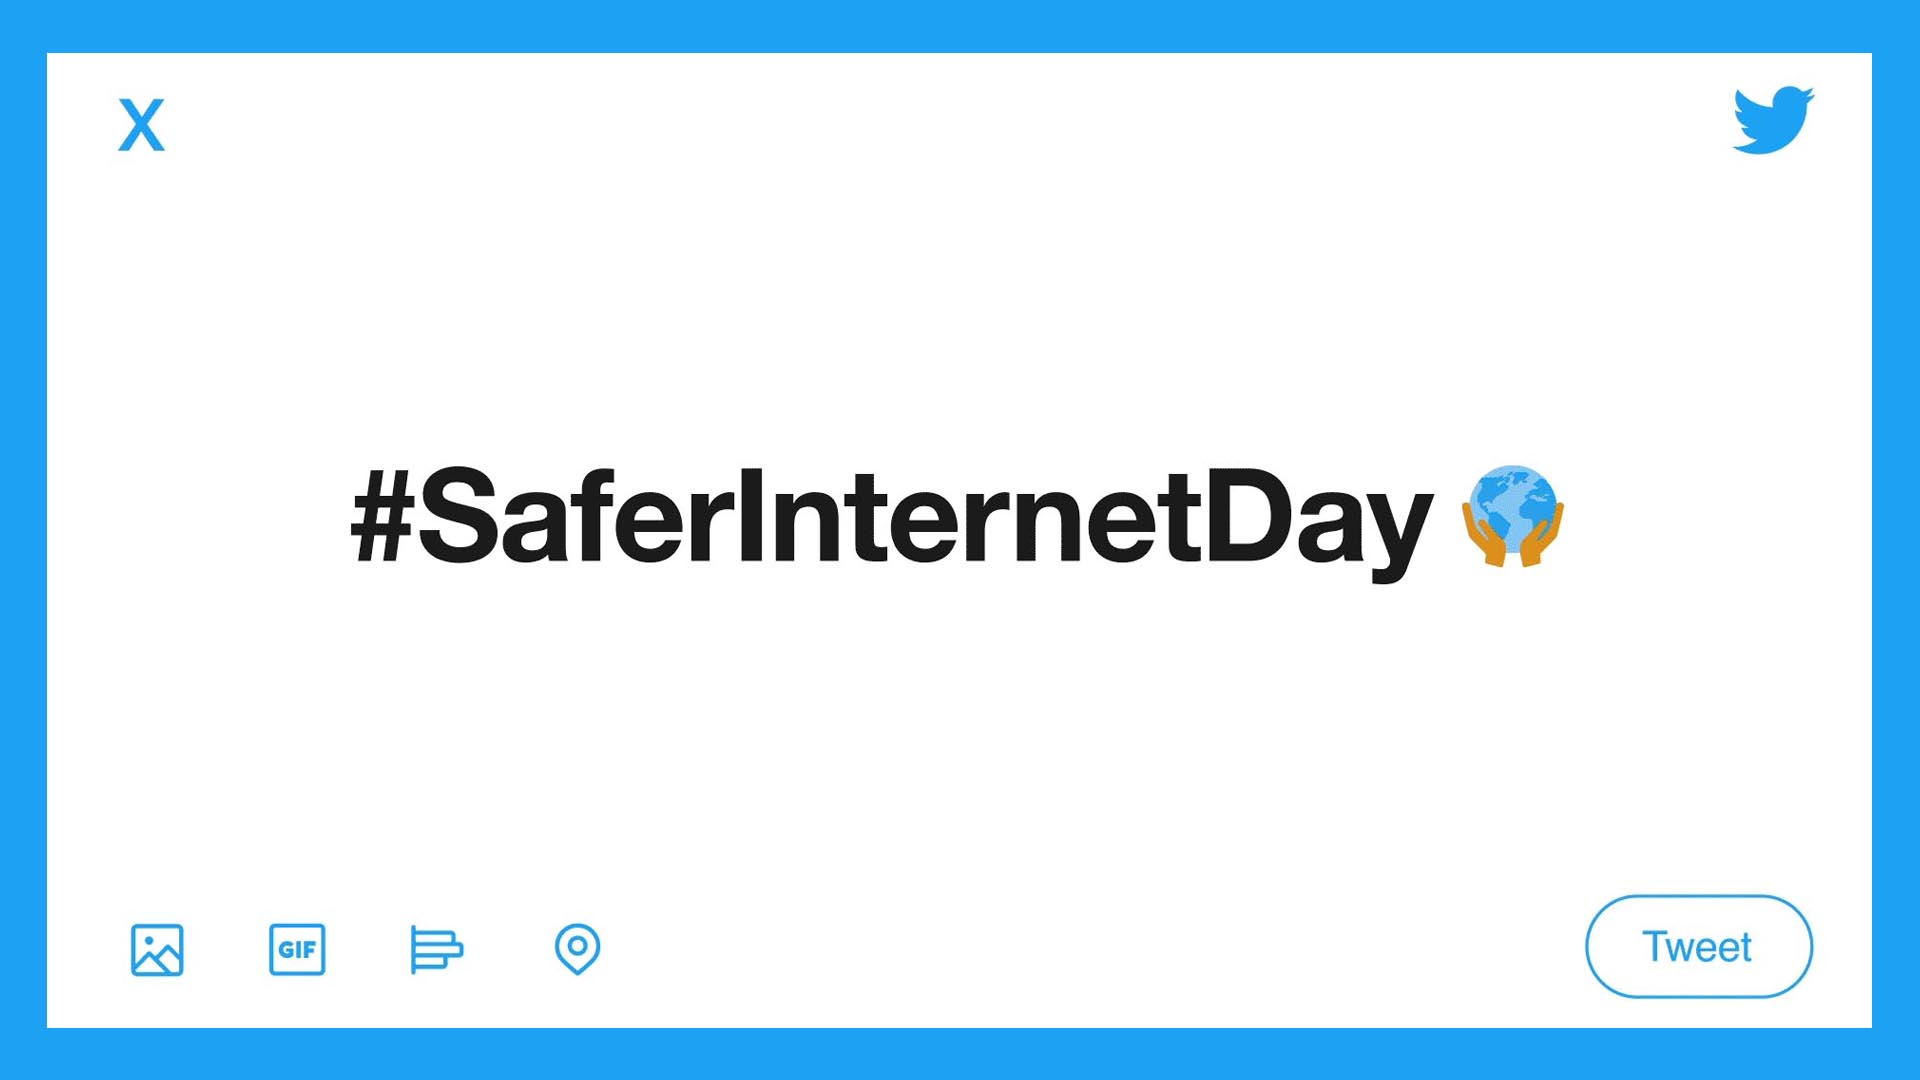 #SaferInternetDay 2021: Creating a better internet for all